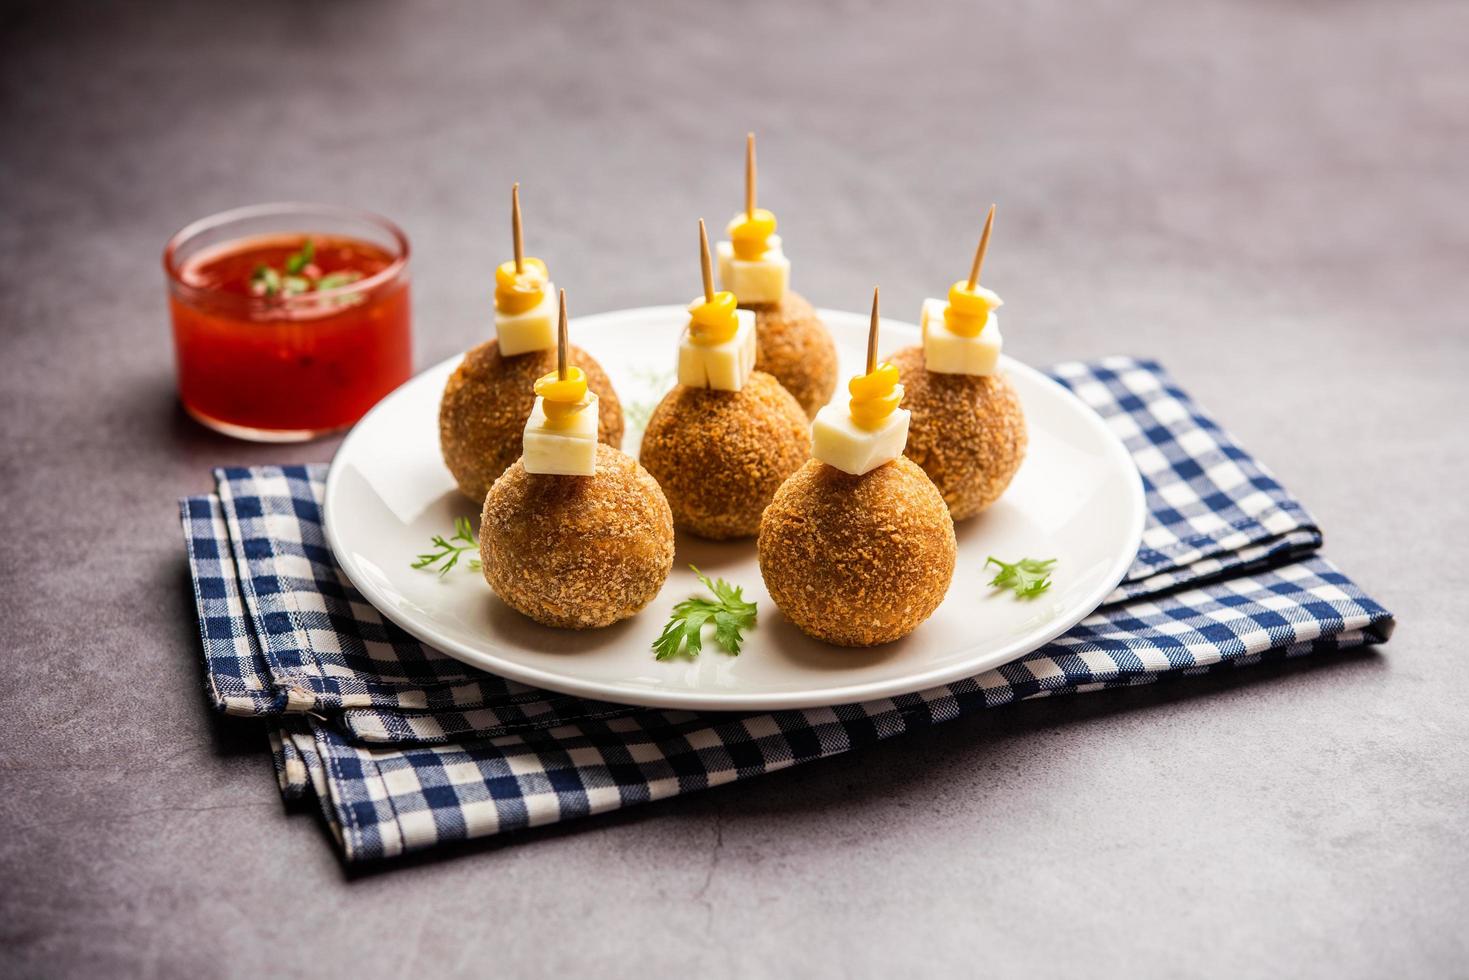 Corn Cheese balls with dip - popular party snack from India photo